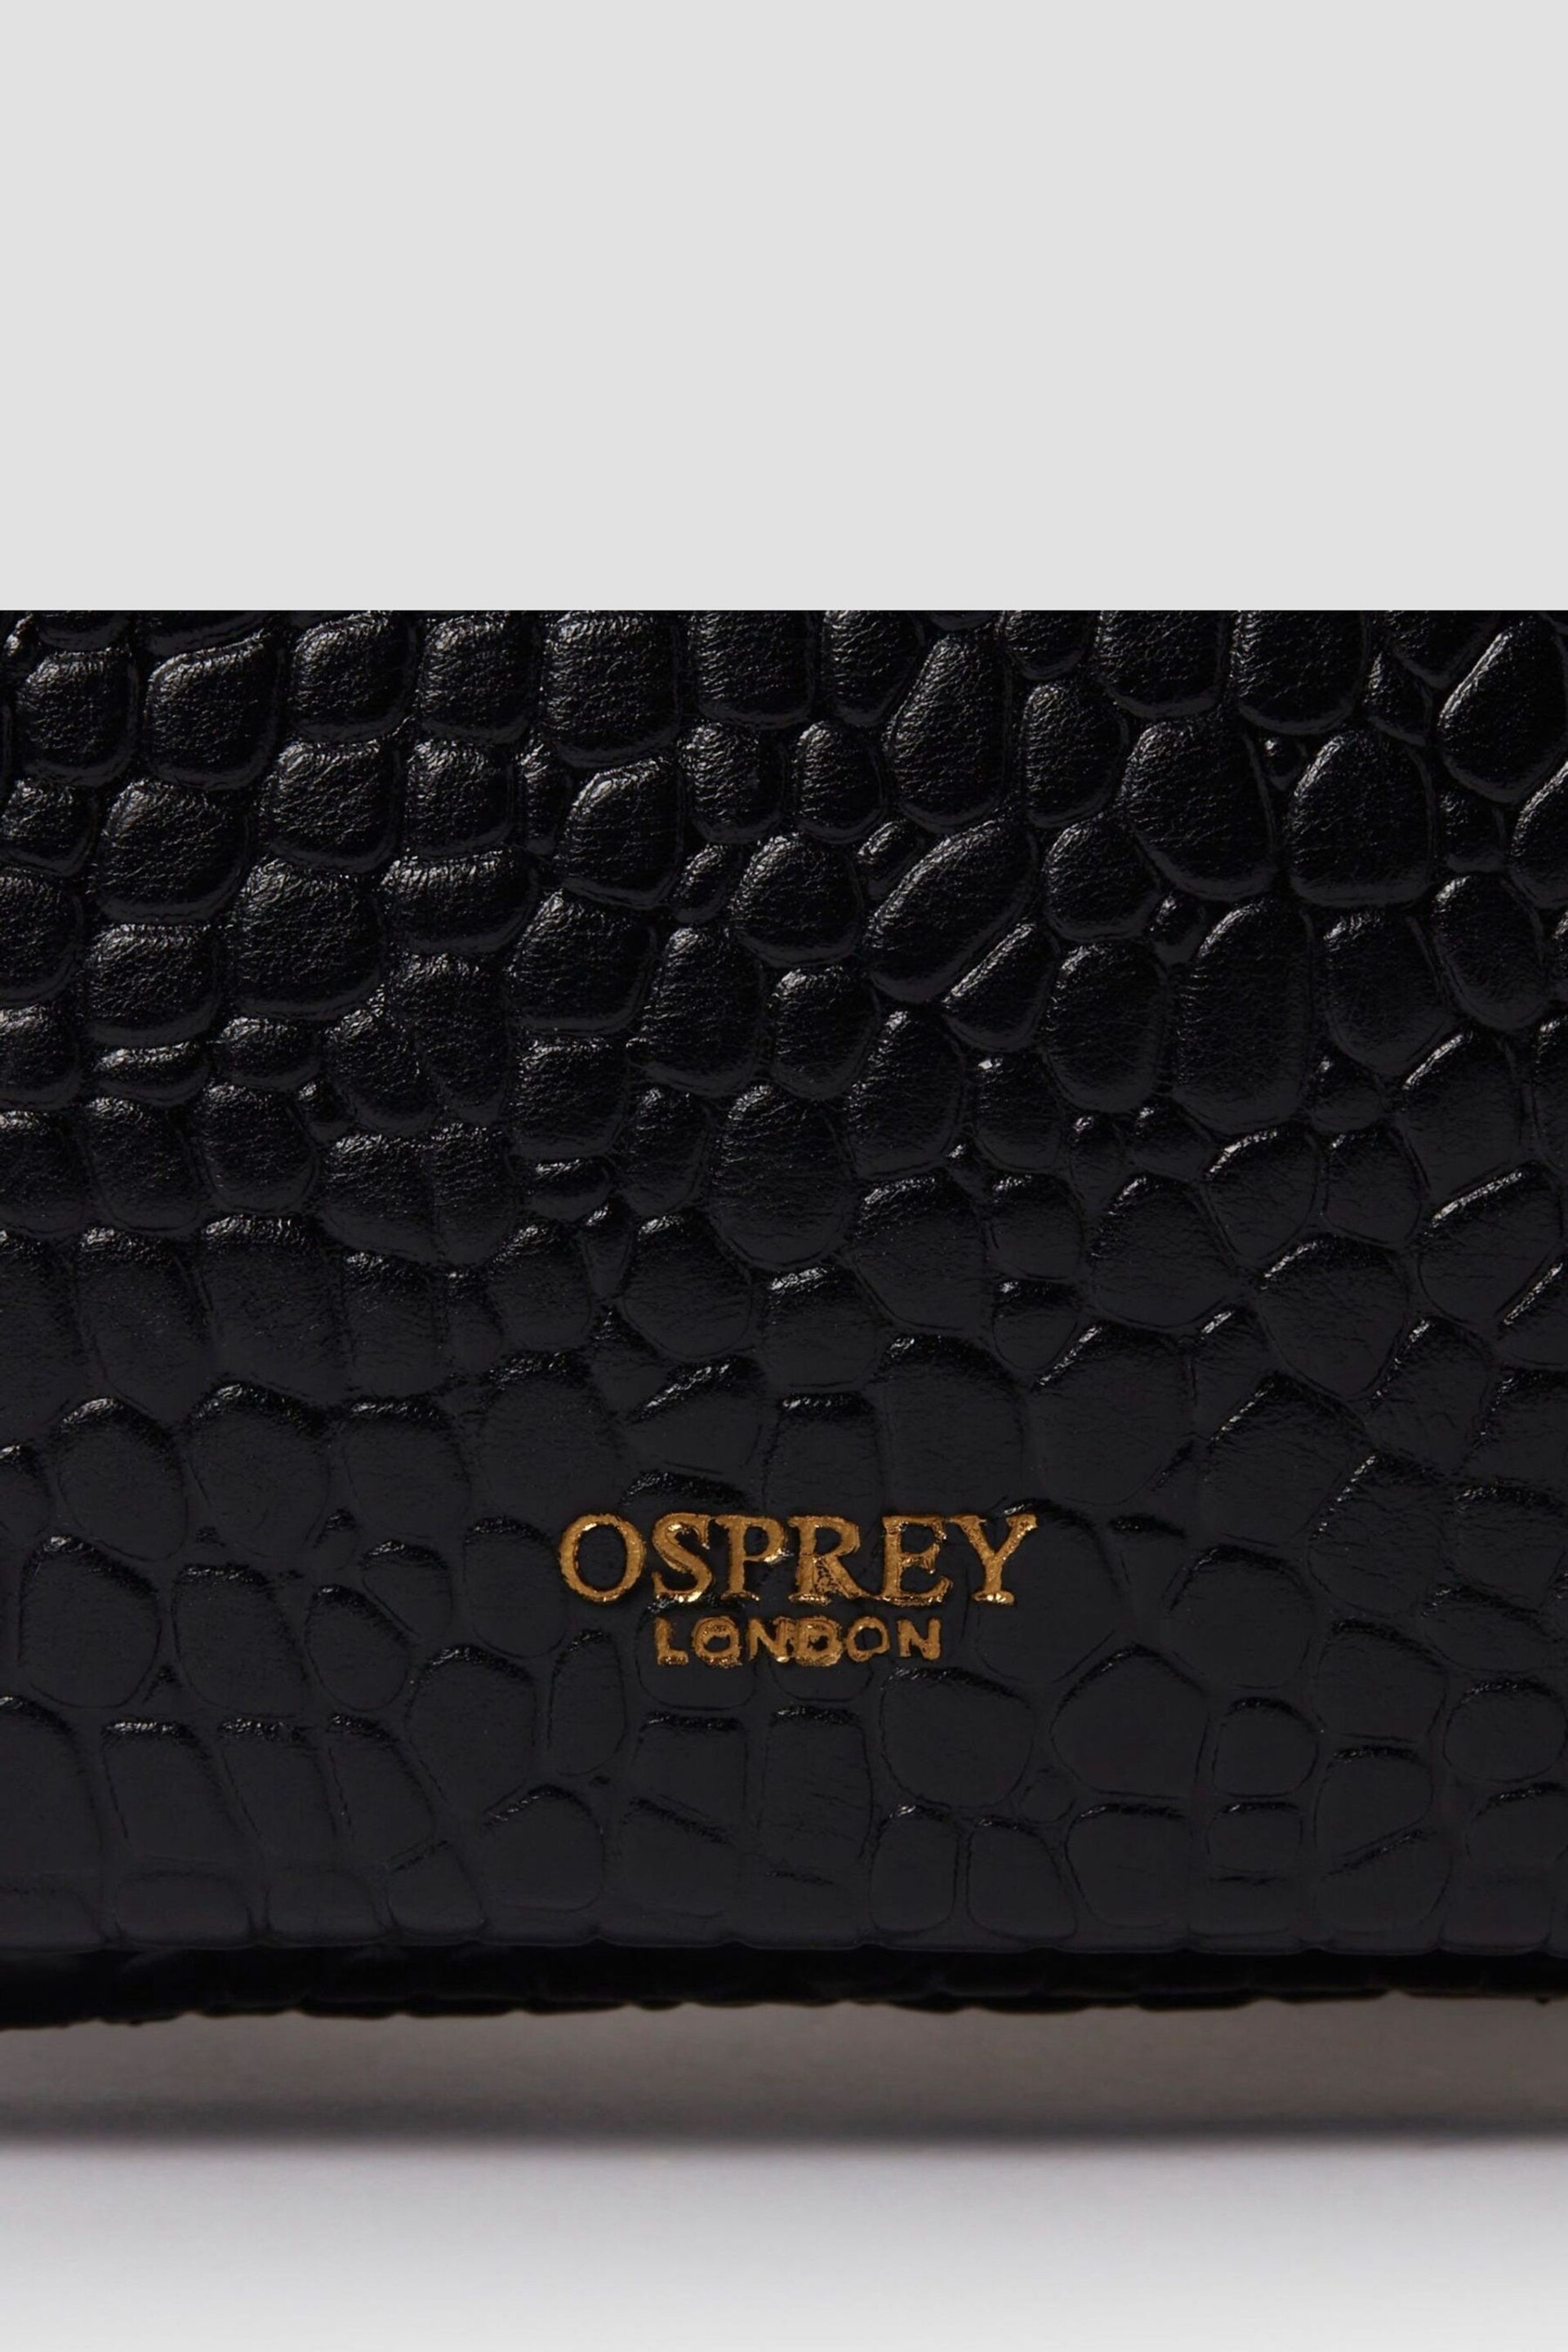 Osprey London  The Ruby Leather Cross-Body Cognac Clutch - Image 4 of 5